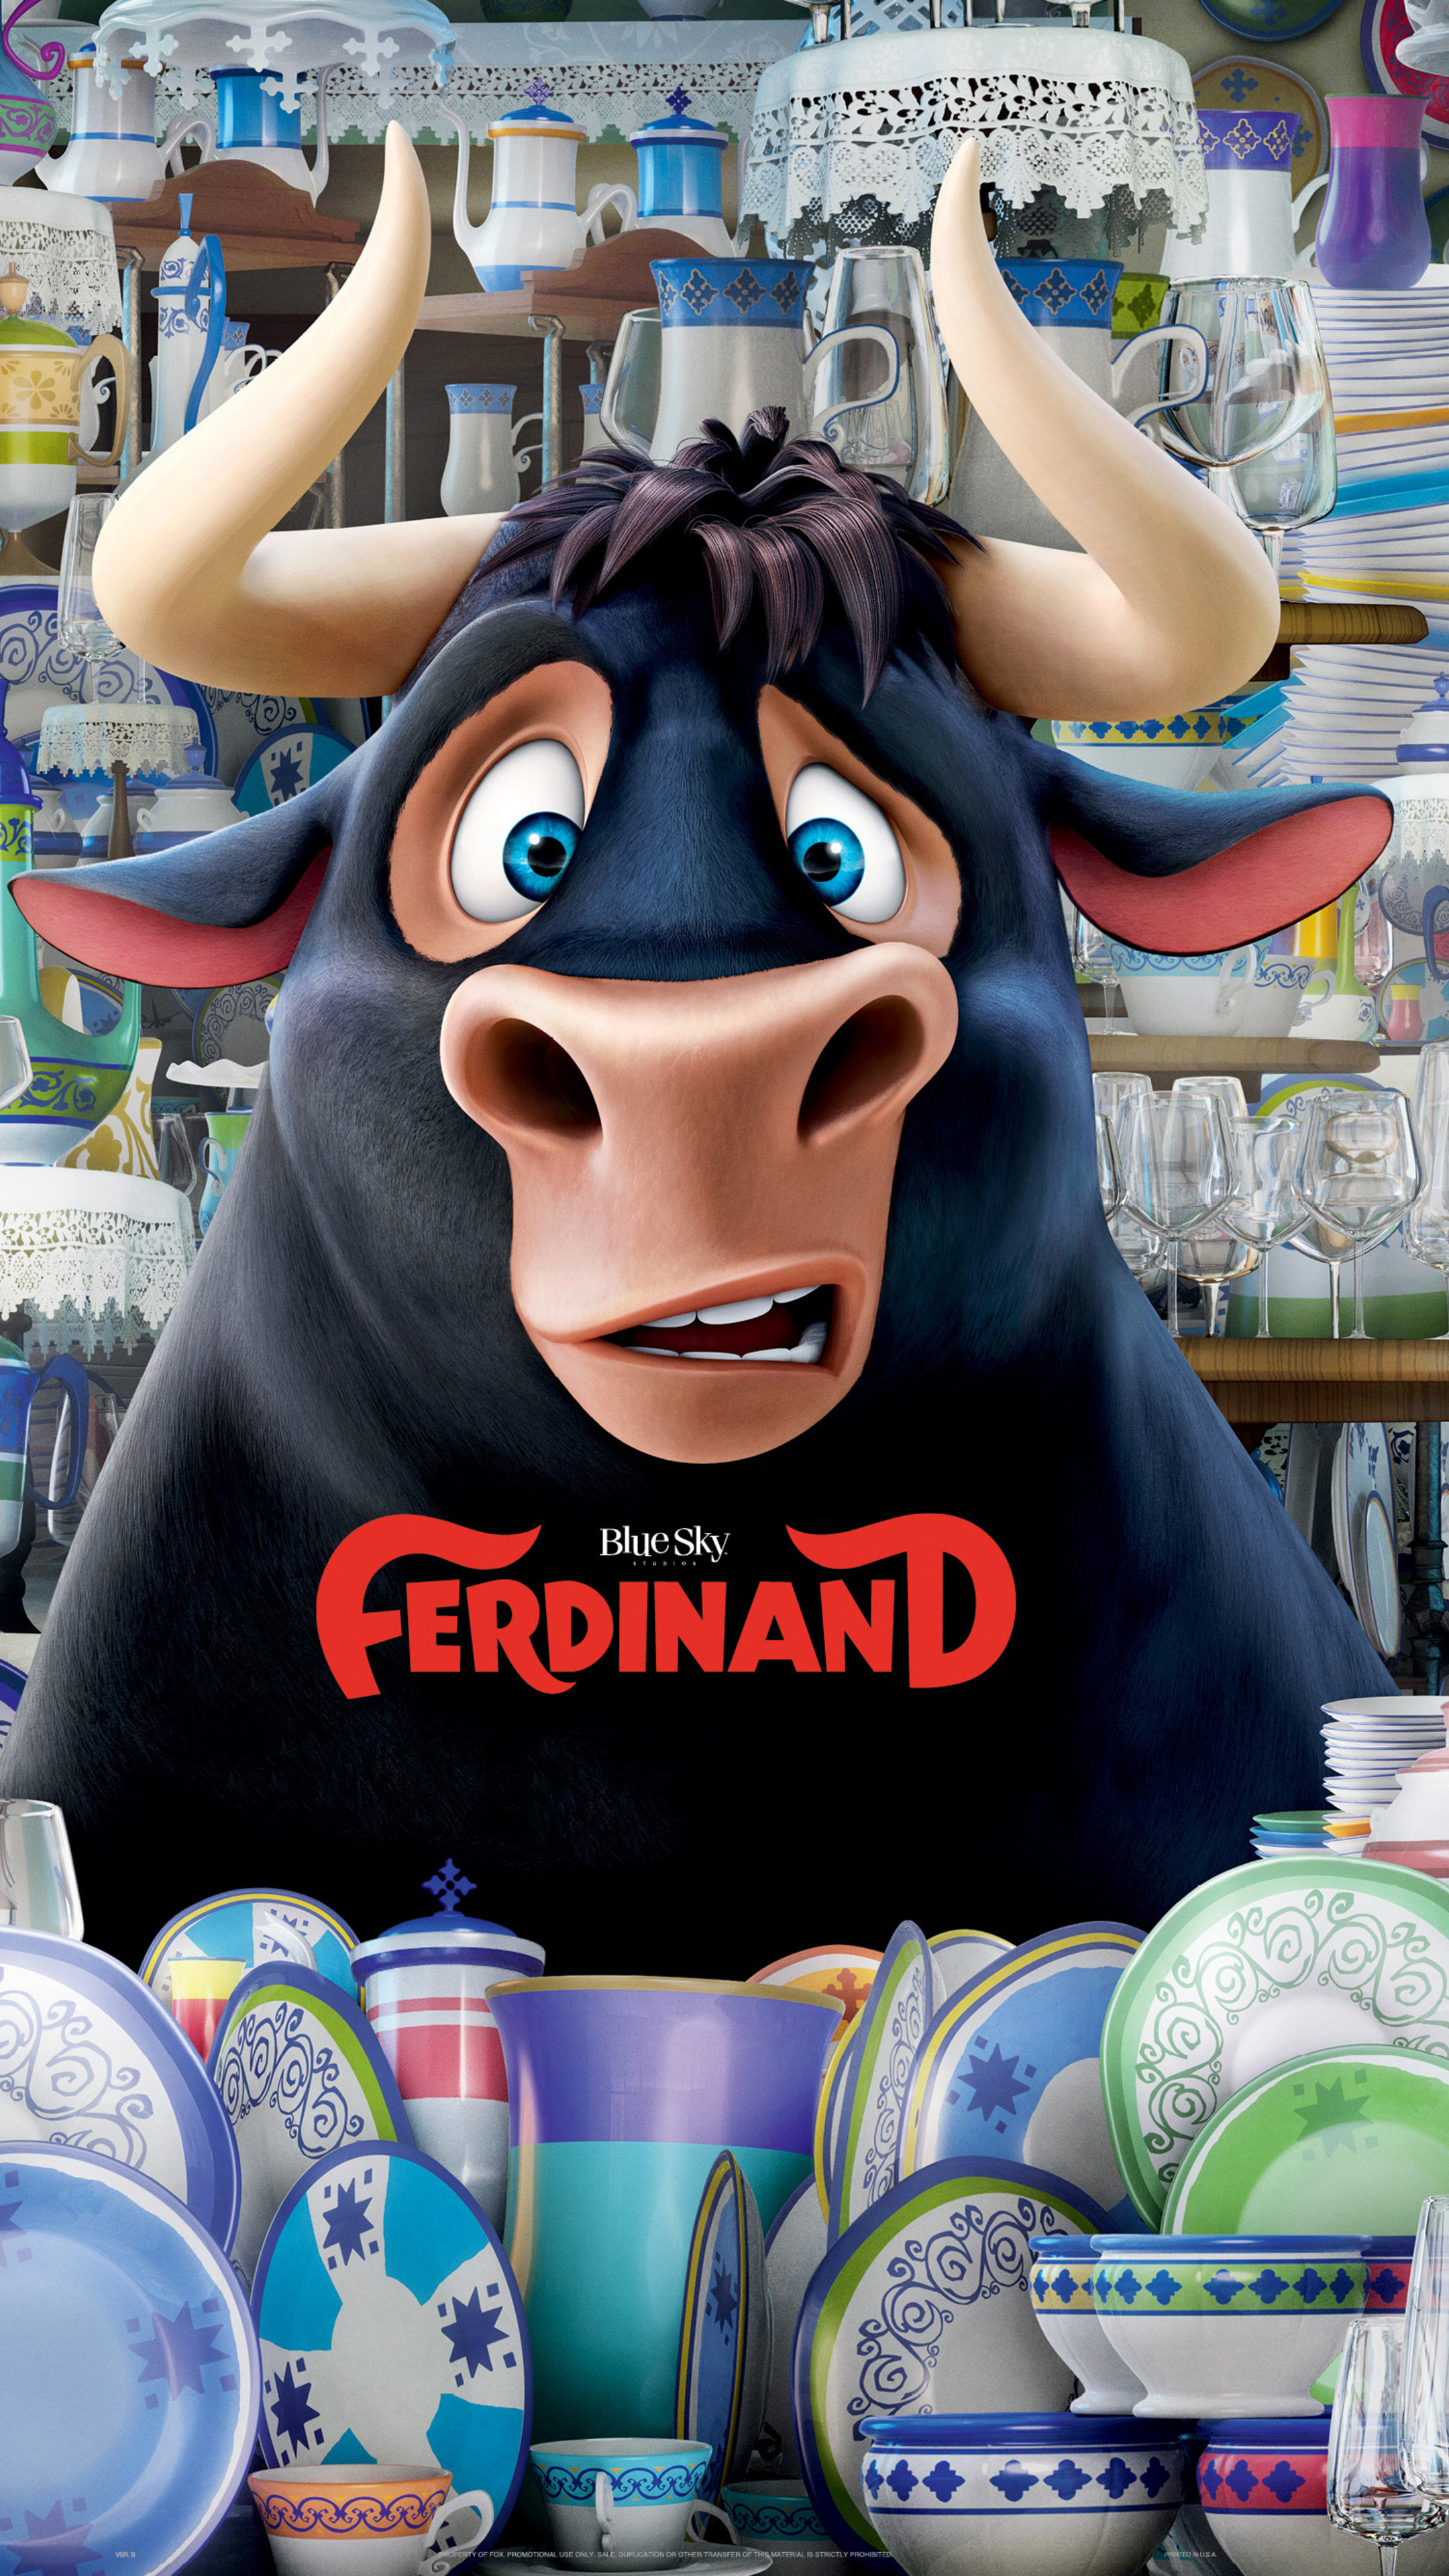 Ferdinand animation, Sony Xperia wallpapers, High-quality images, Stunning visuals, 2160x3840 4K Handy